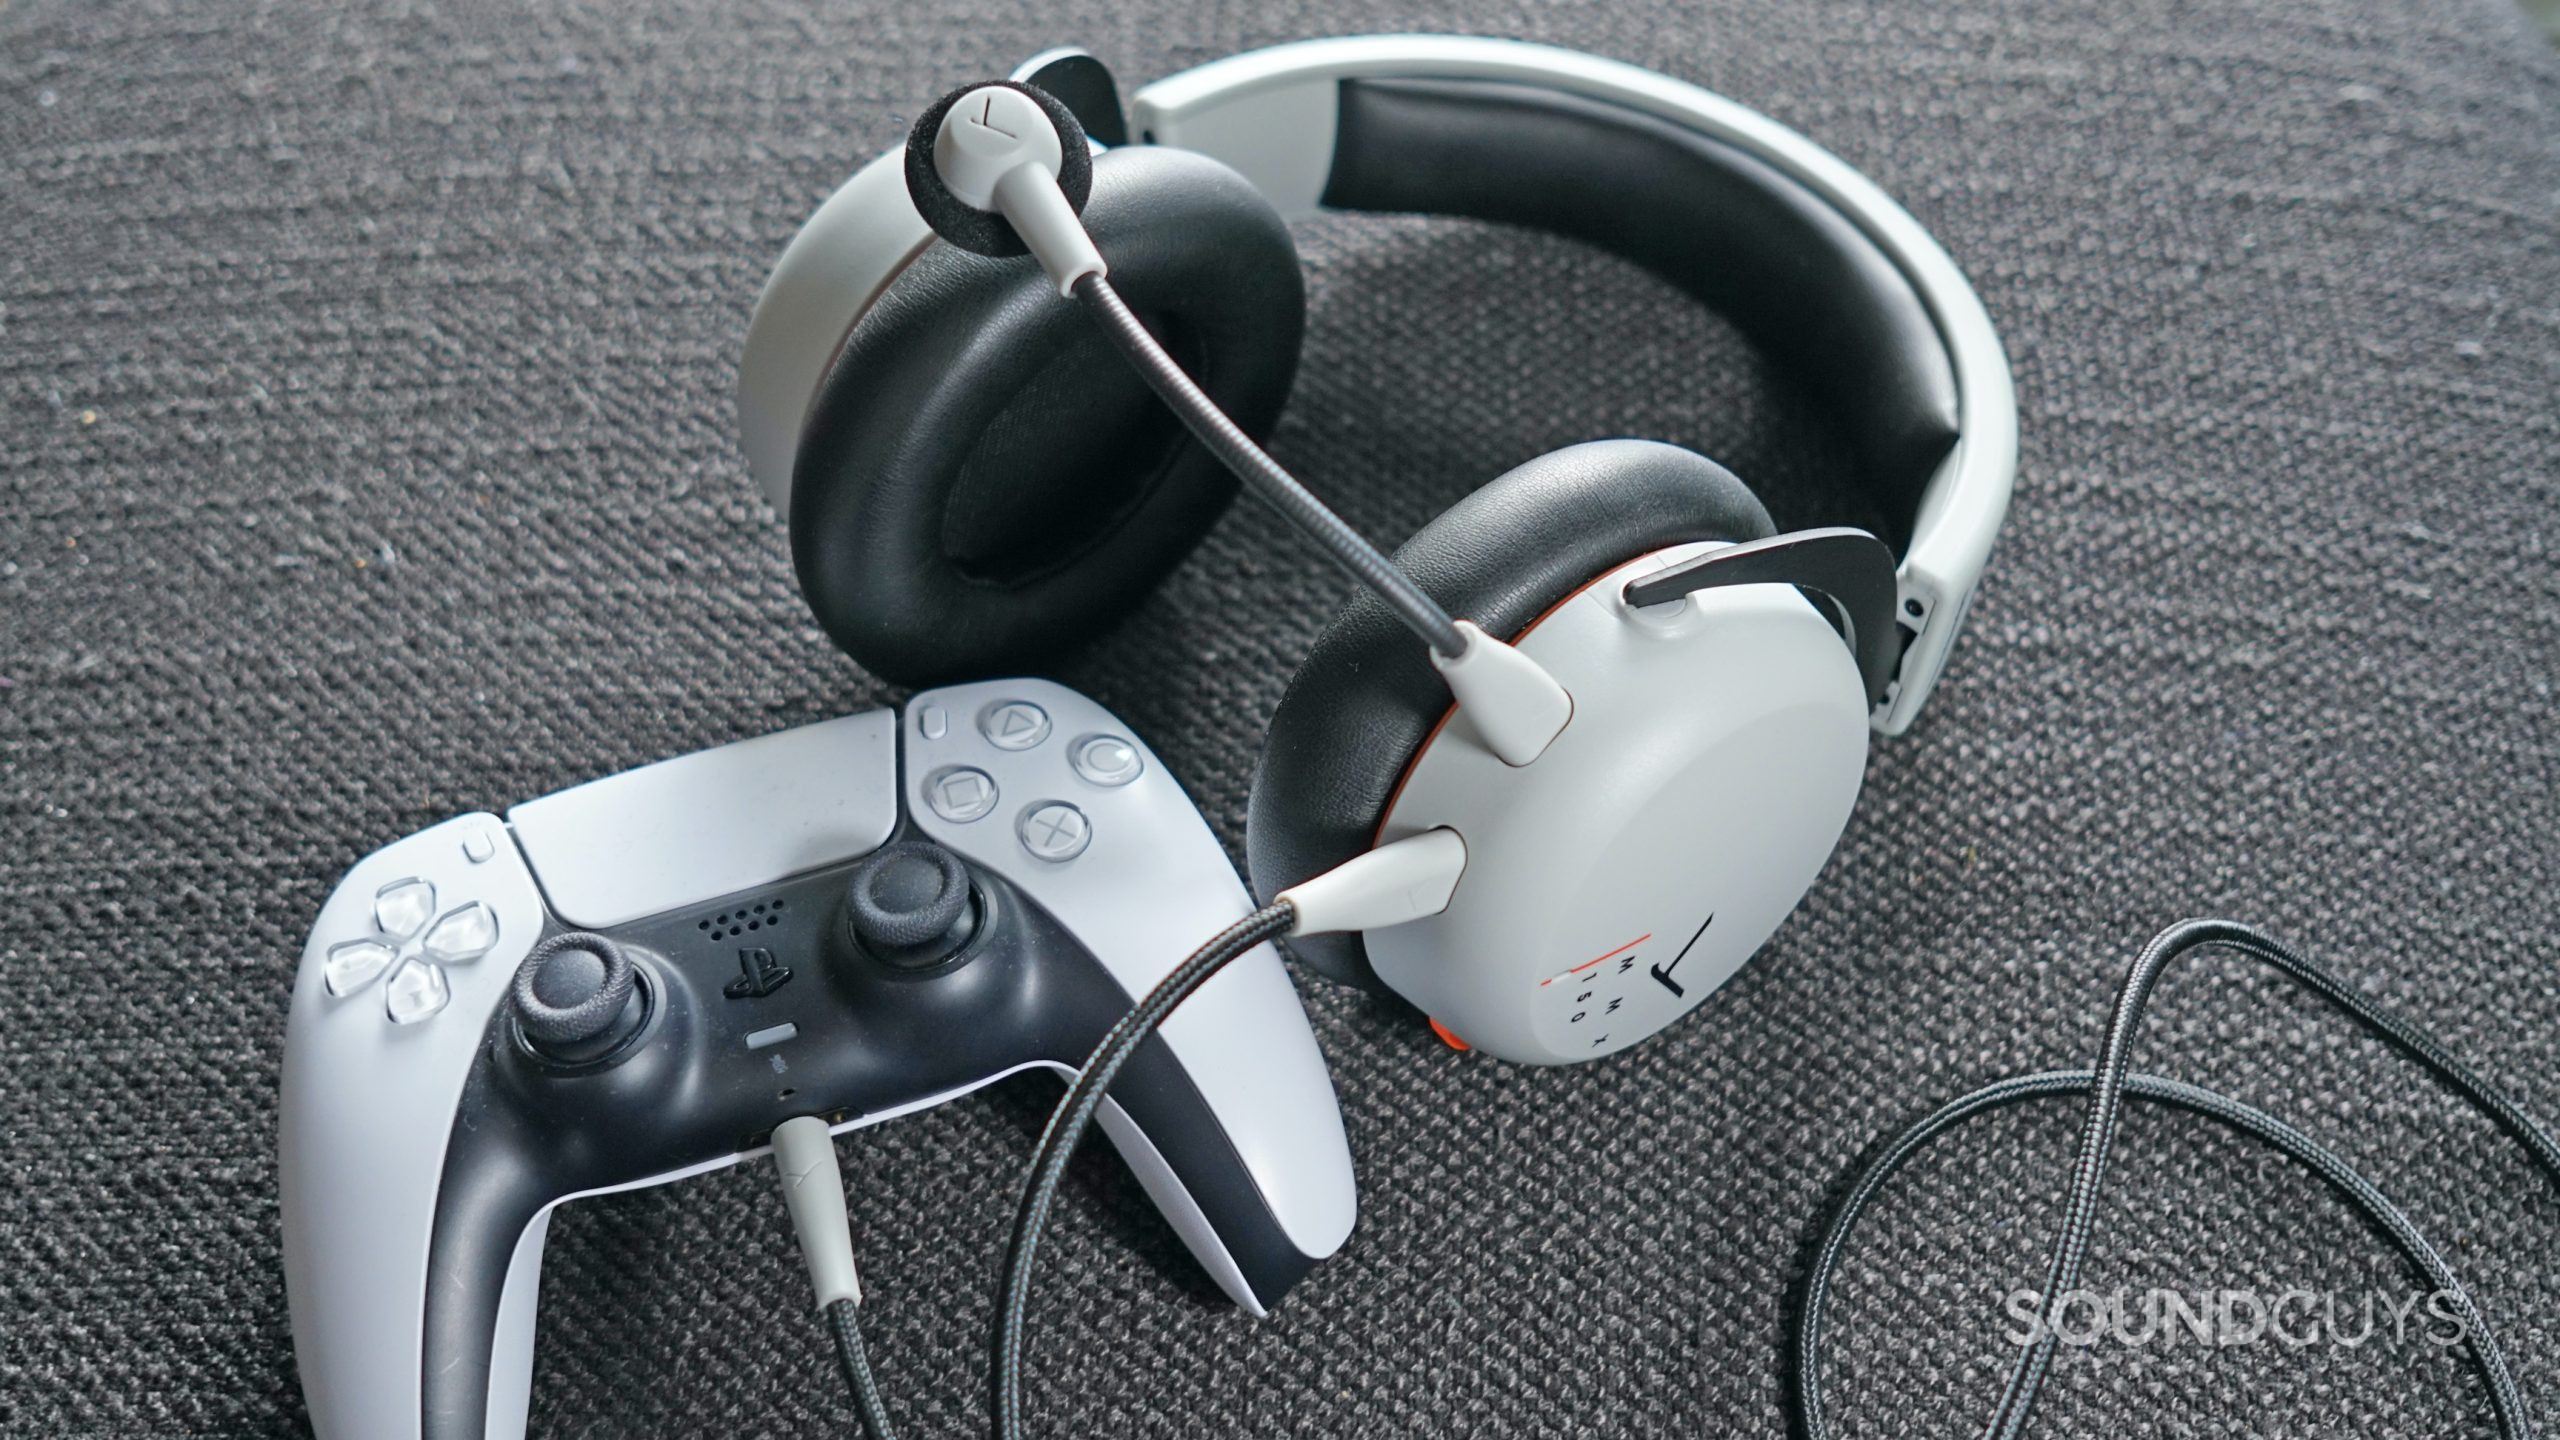 The Beyerdynamic MMX 150 lays on a fabric surface plugged into a PlayStation DualShock 5 controller.